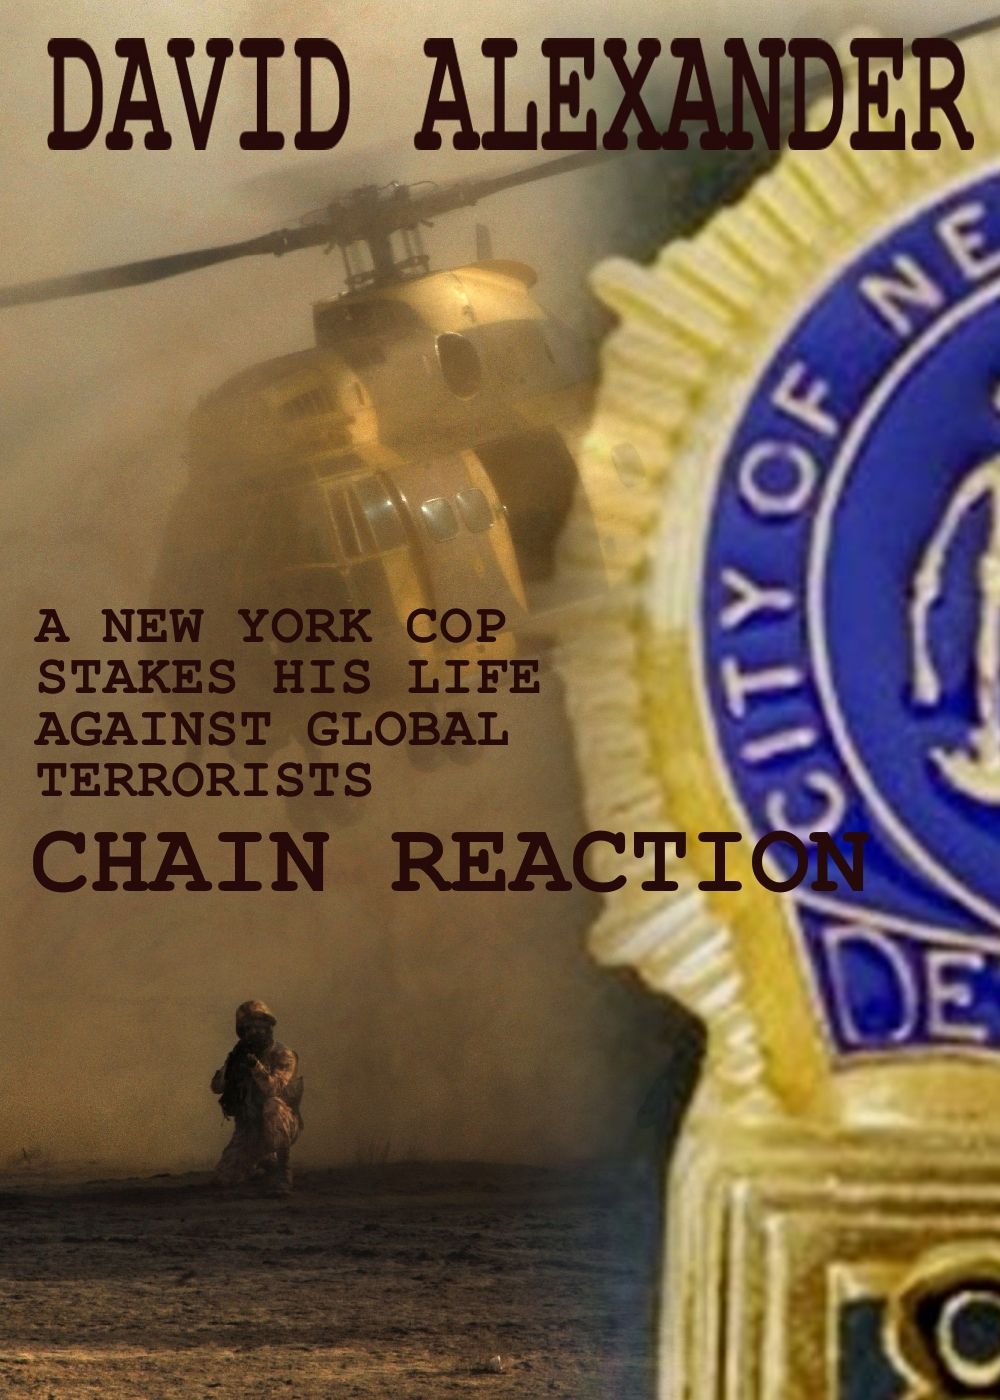 Read Chain Reaction on Kindle. In David Alexander's Chain Reaction, a driven NYPD detective goes after a master terrorist in a global chase that pits New York City street smarts against the deadly skills of the most dangerous man on earth.